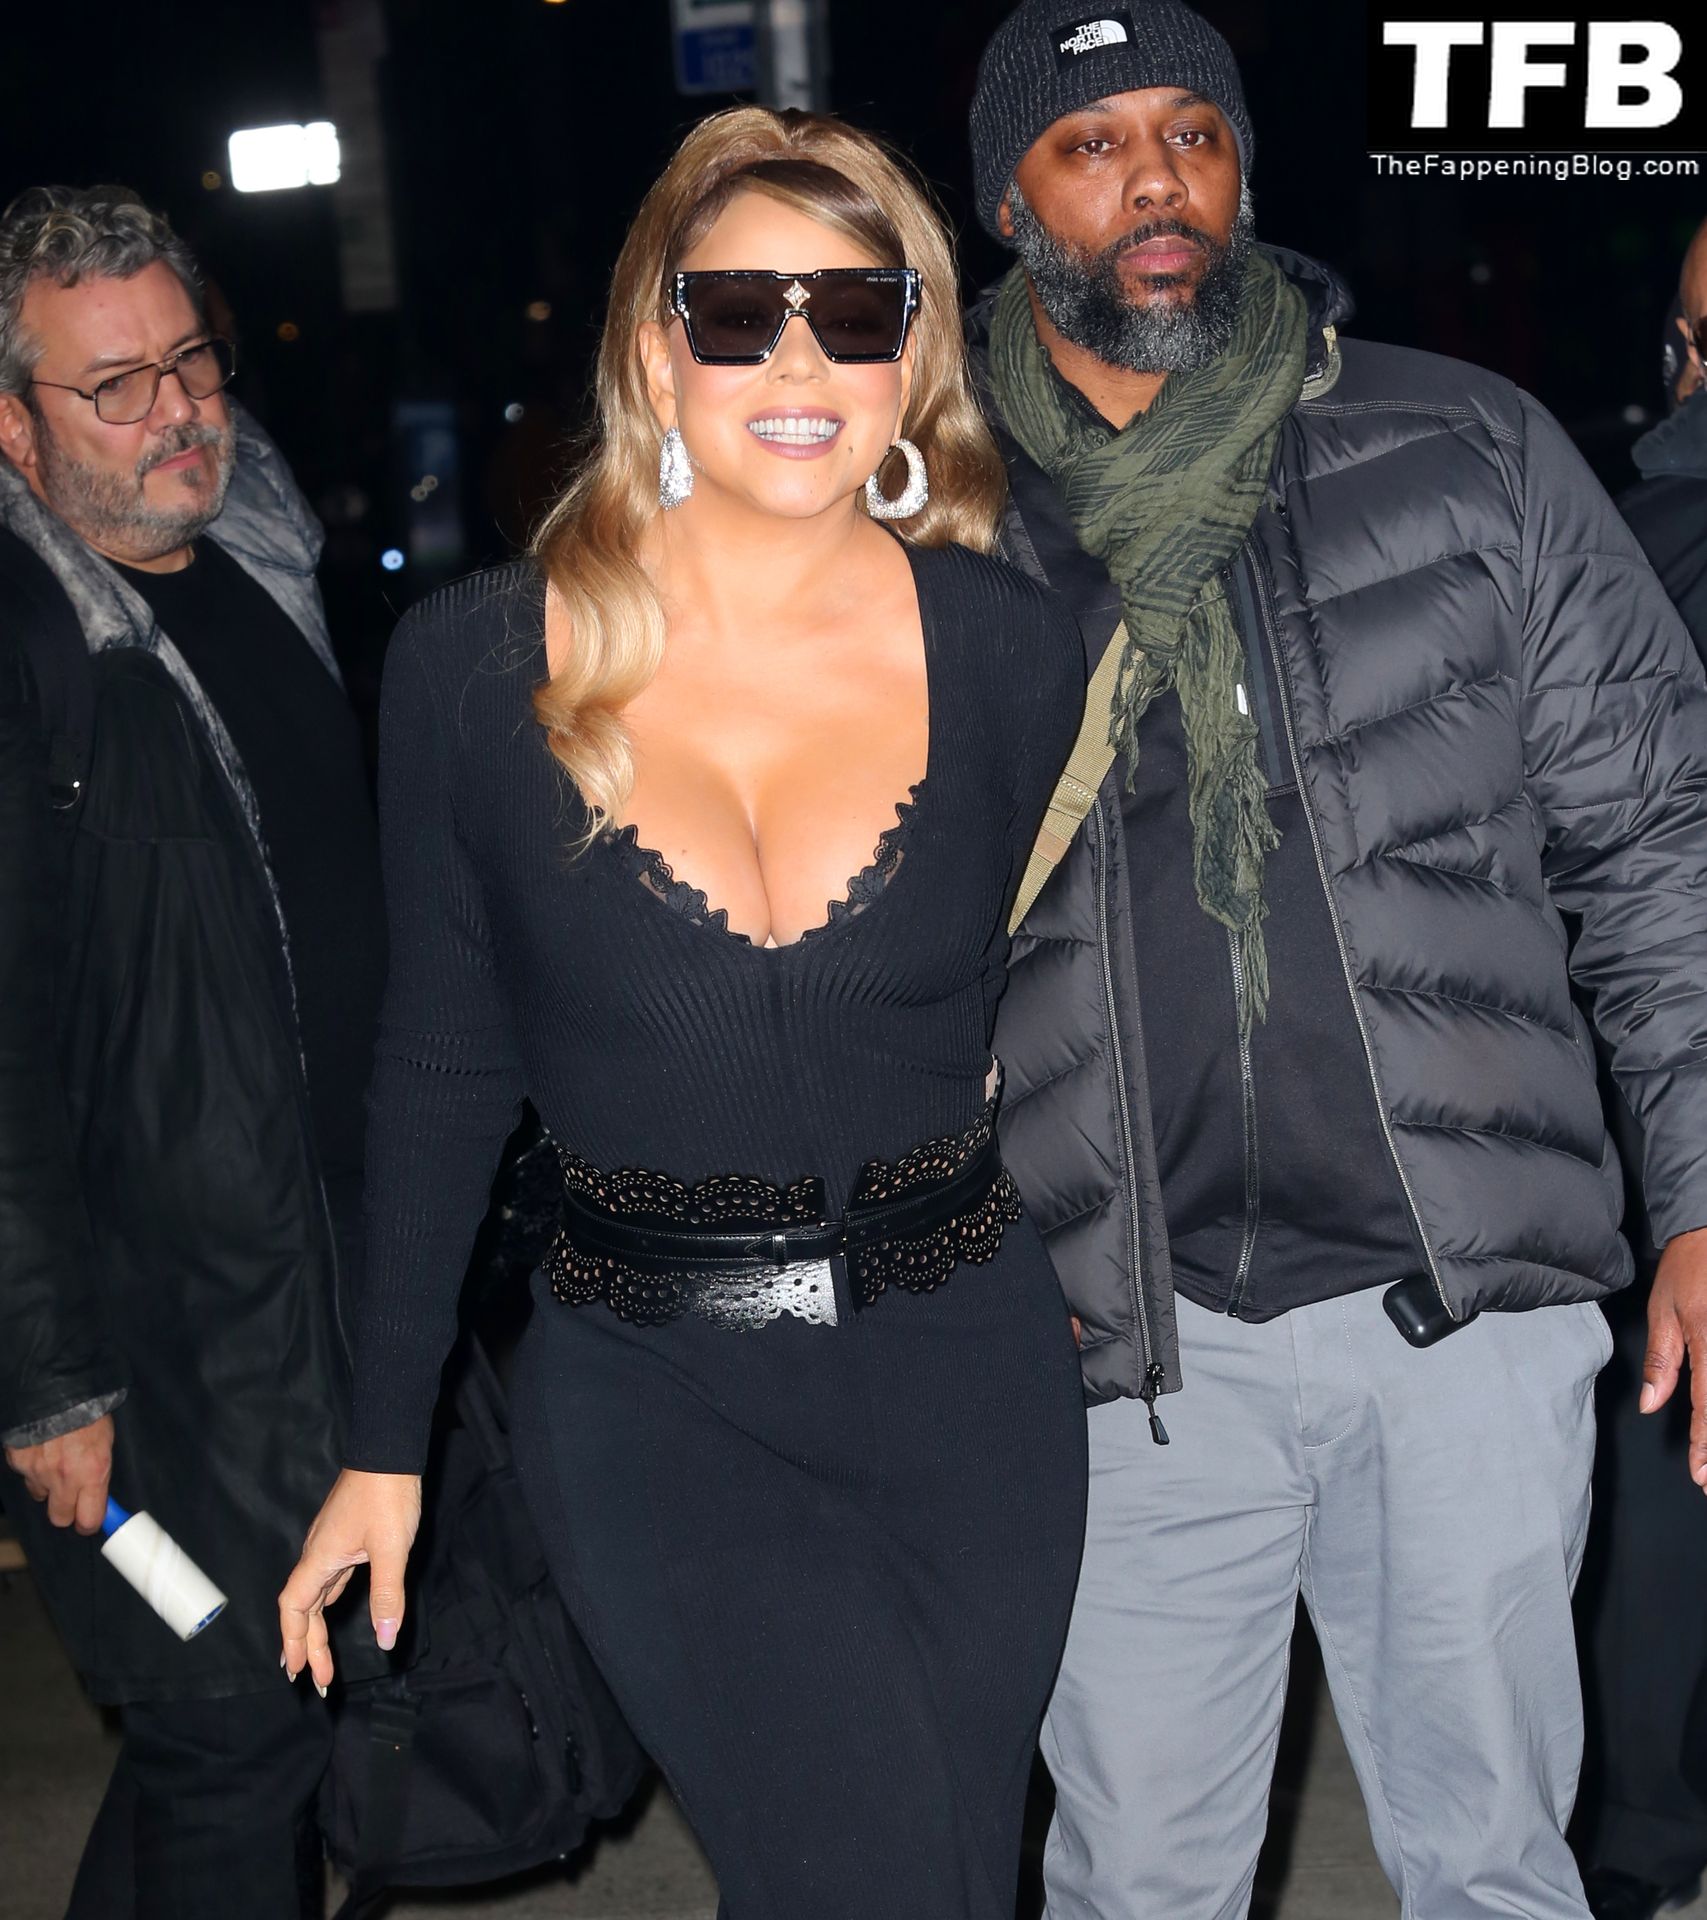 Mariah Carey Leaves The Late Show With Stephen Colbert in NYC (70 Photos)